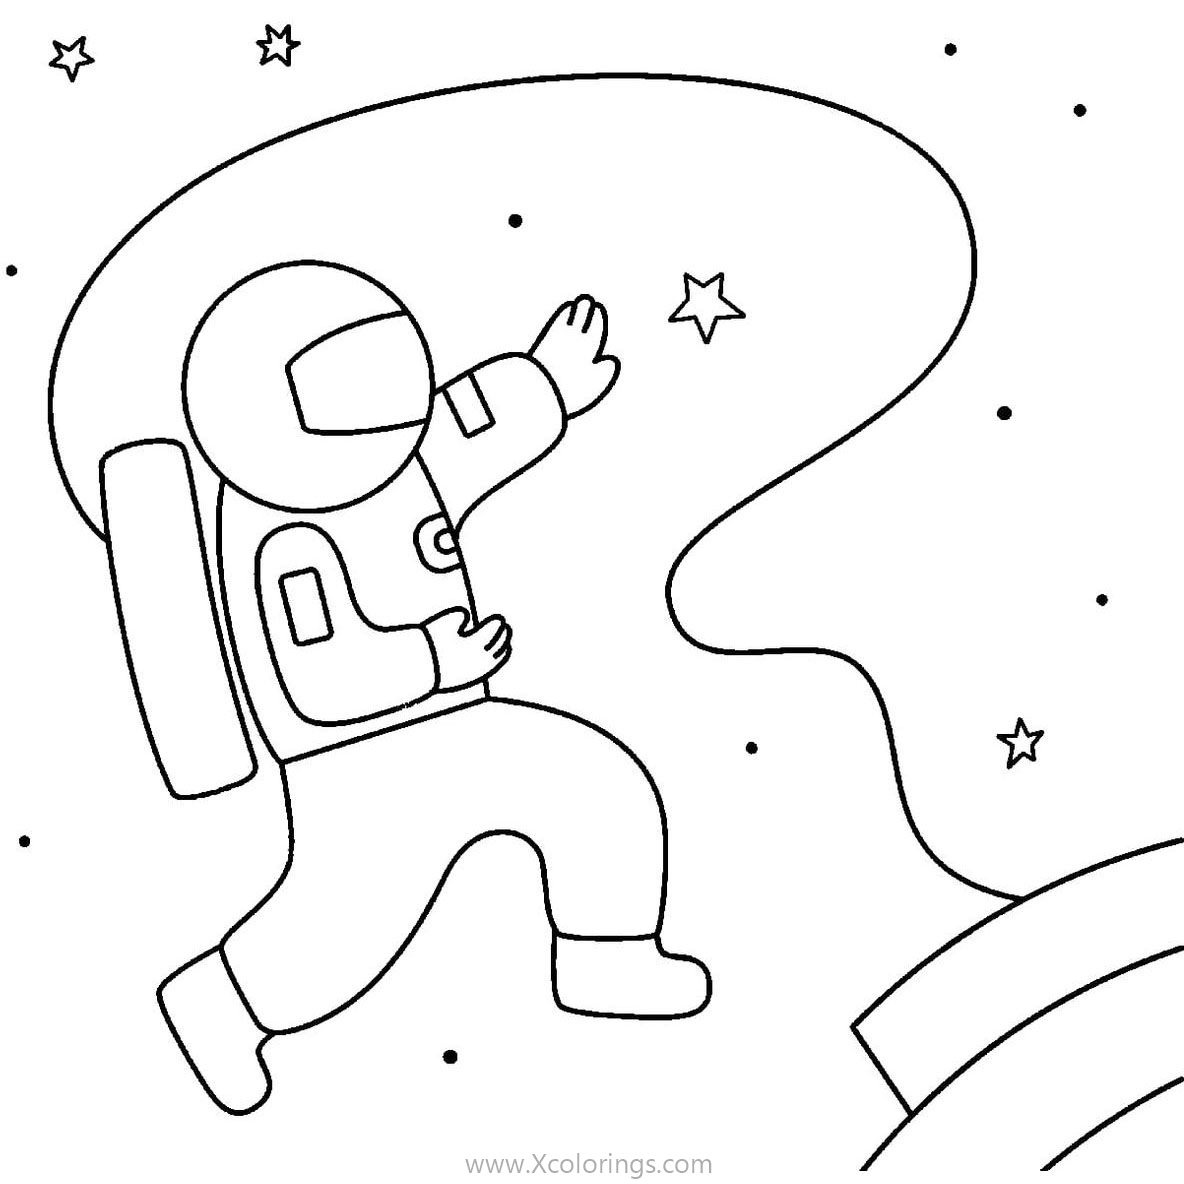 Free Astronaut Coloring Pages Easy for 2 Years Old Kids printable